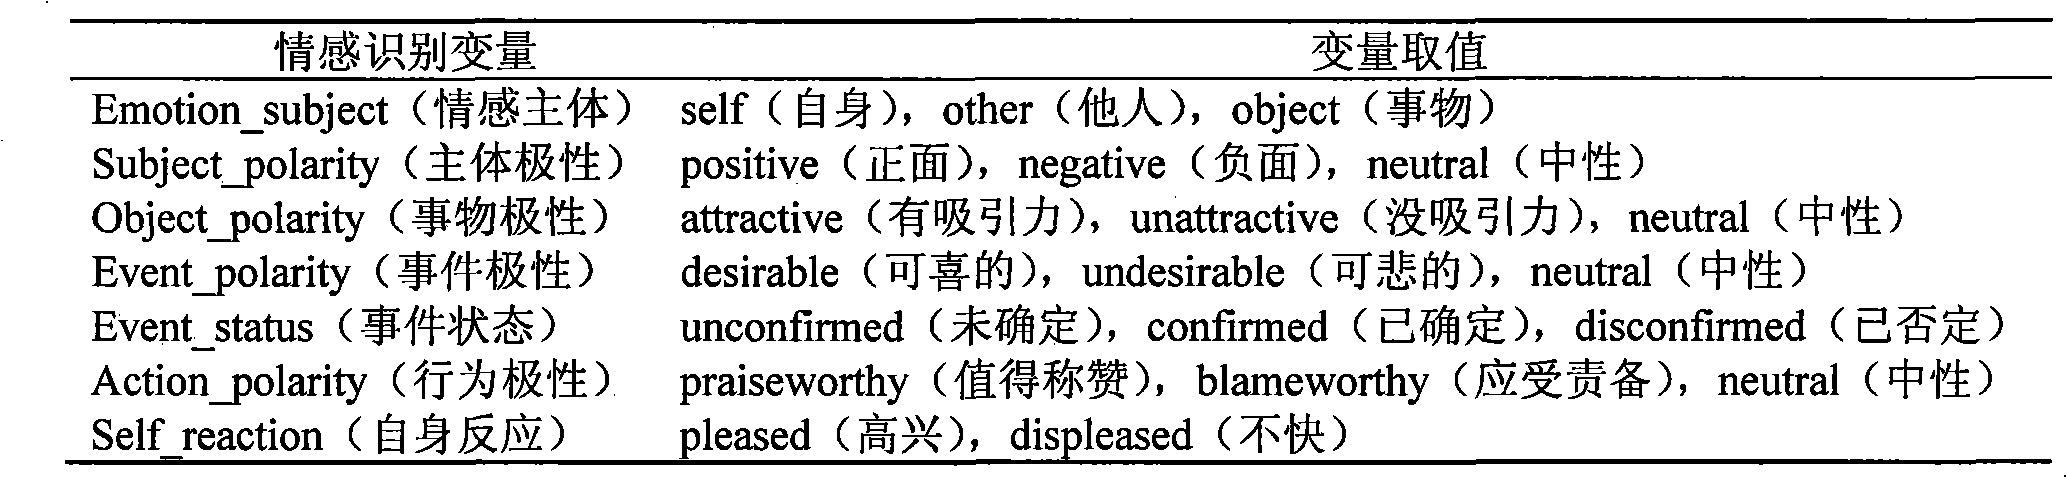 Cognitive evaluation theory-based Chinese text emotion recognition method